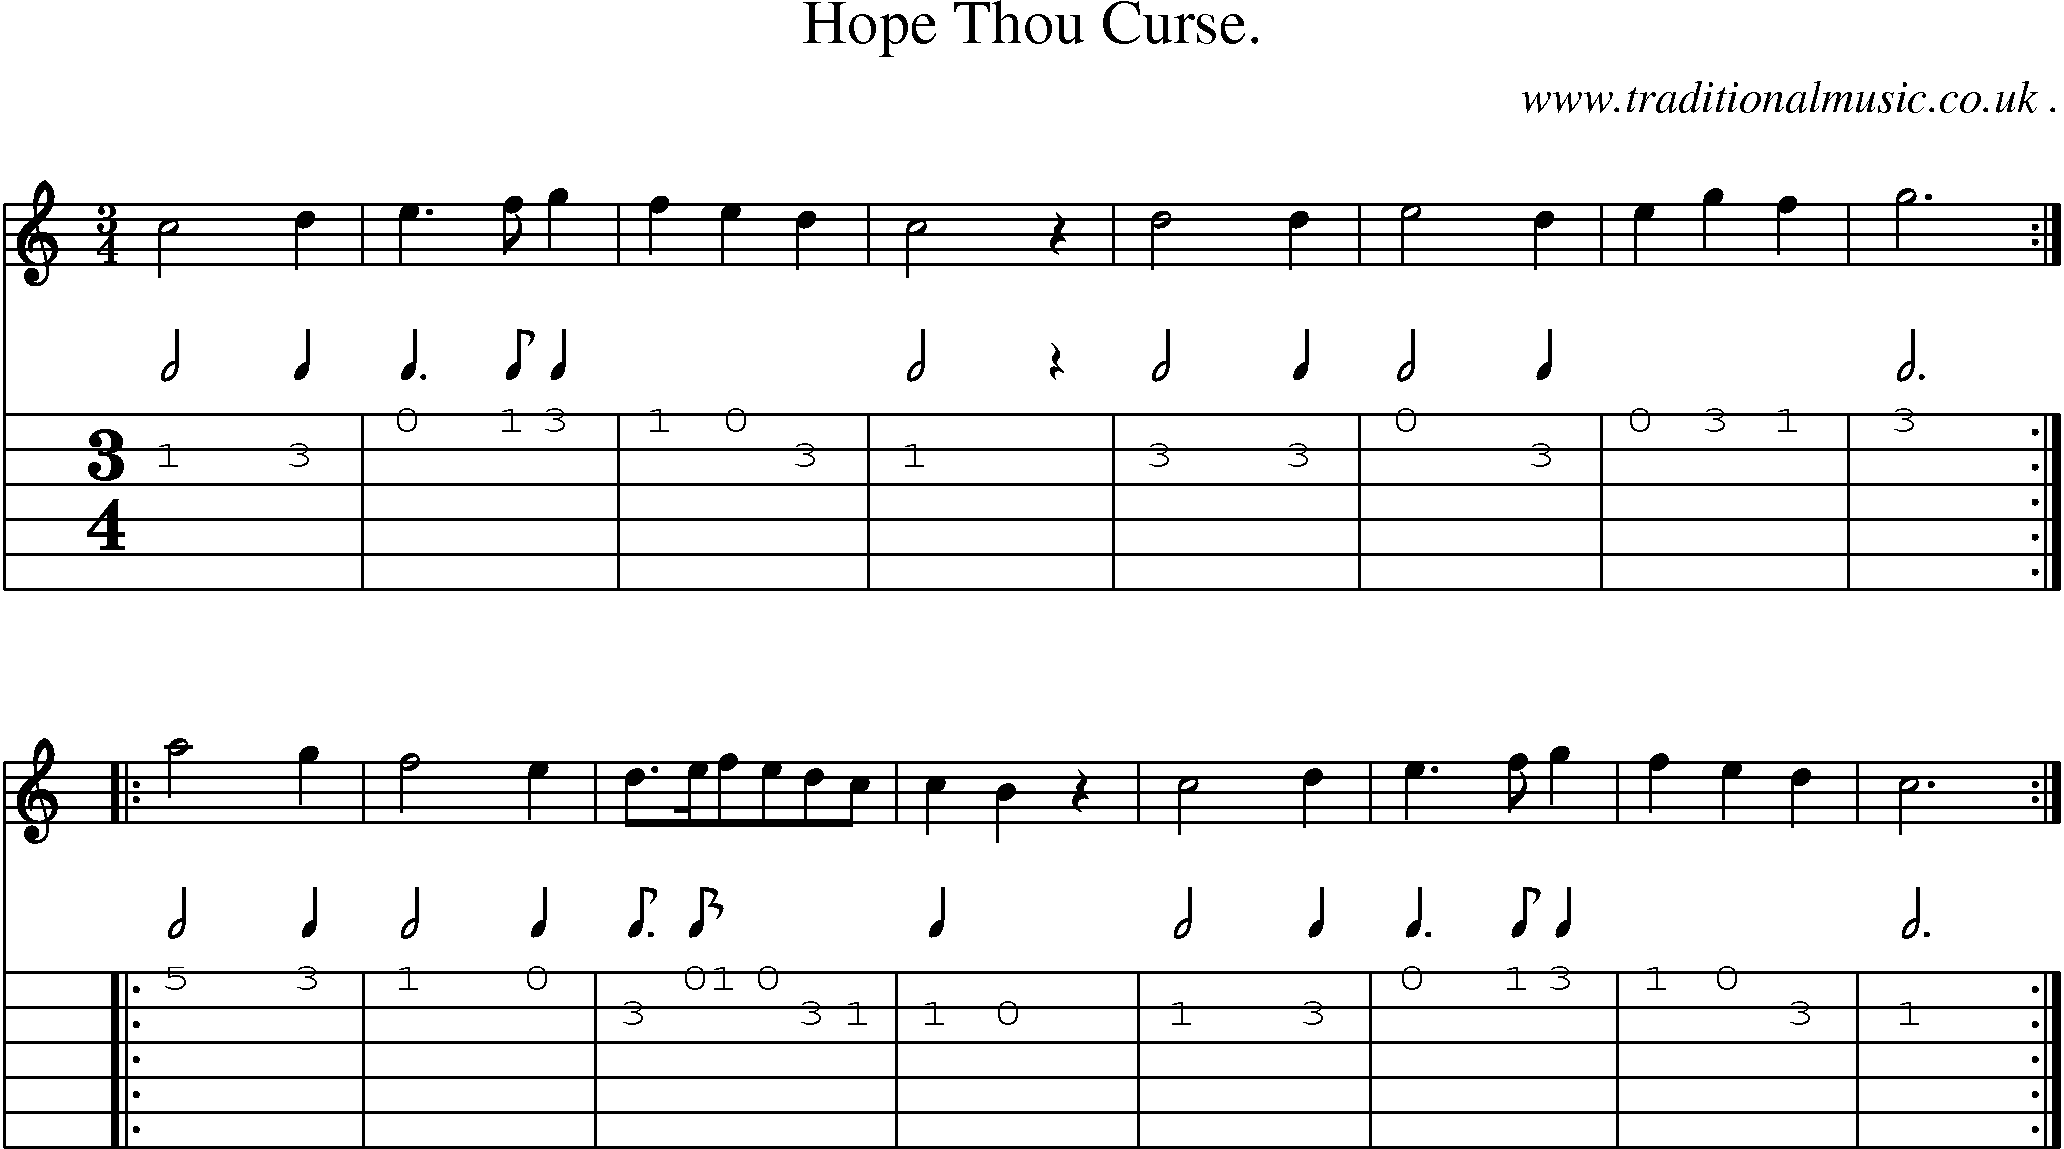 Sheet-Music and Guitar Tabs for Hope Thou Curse